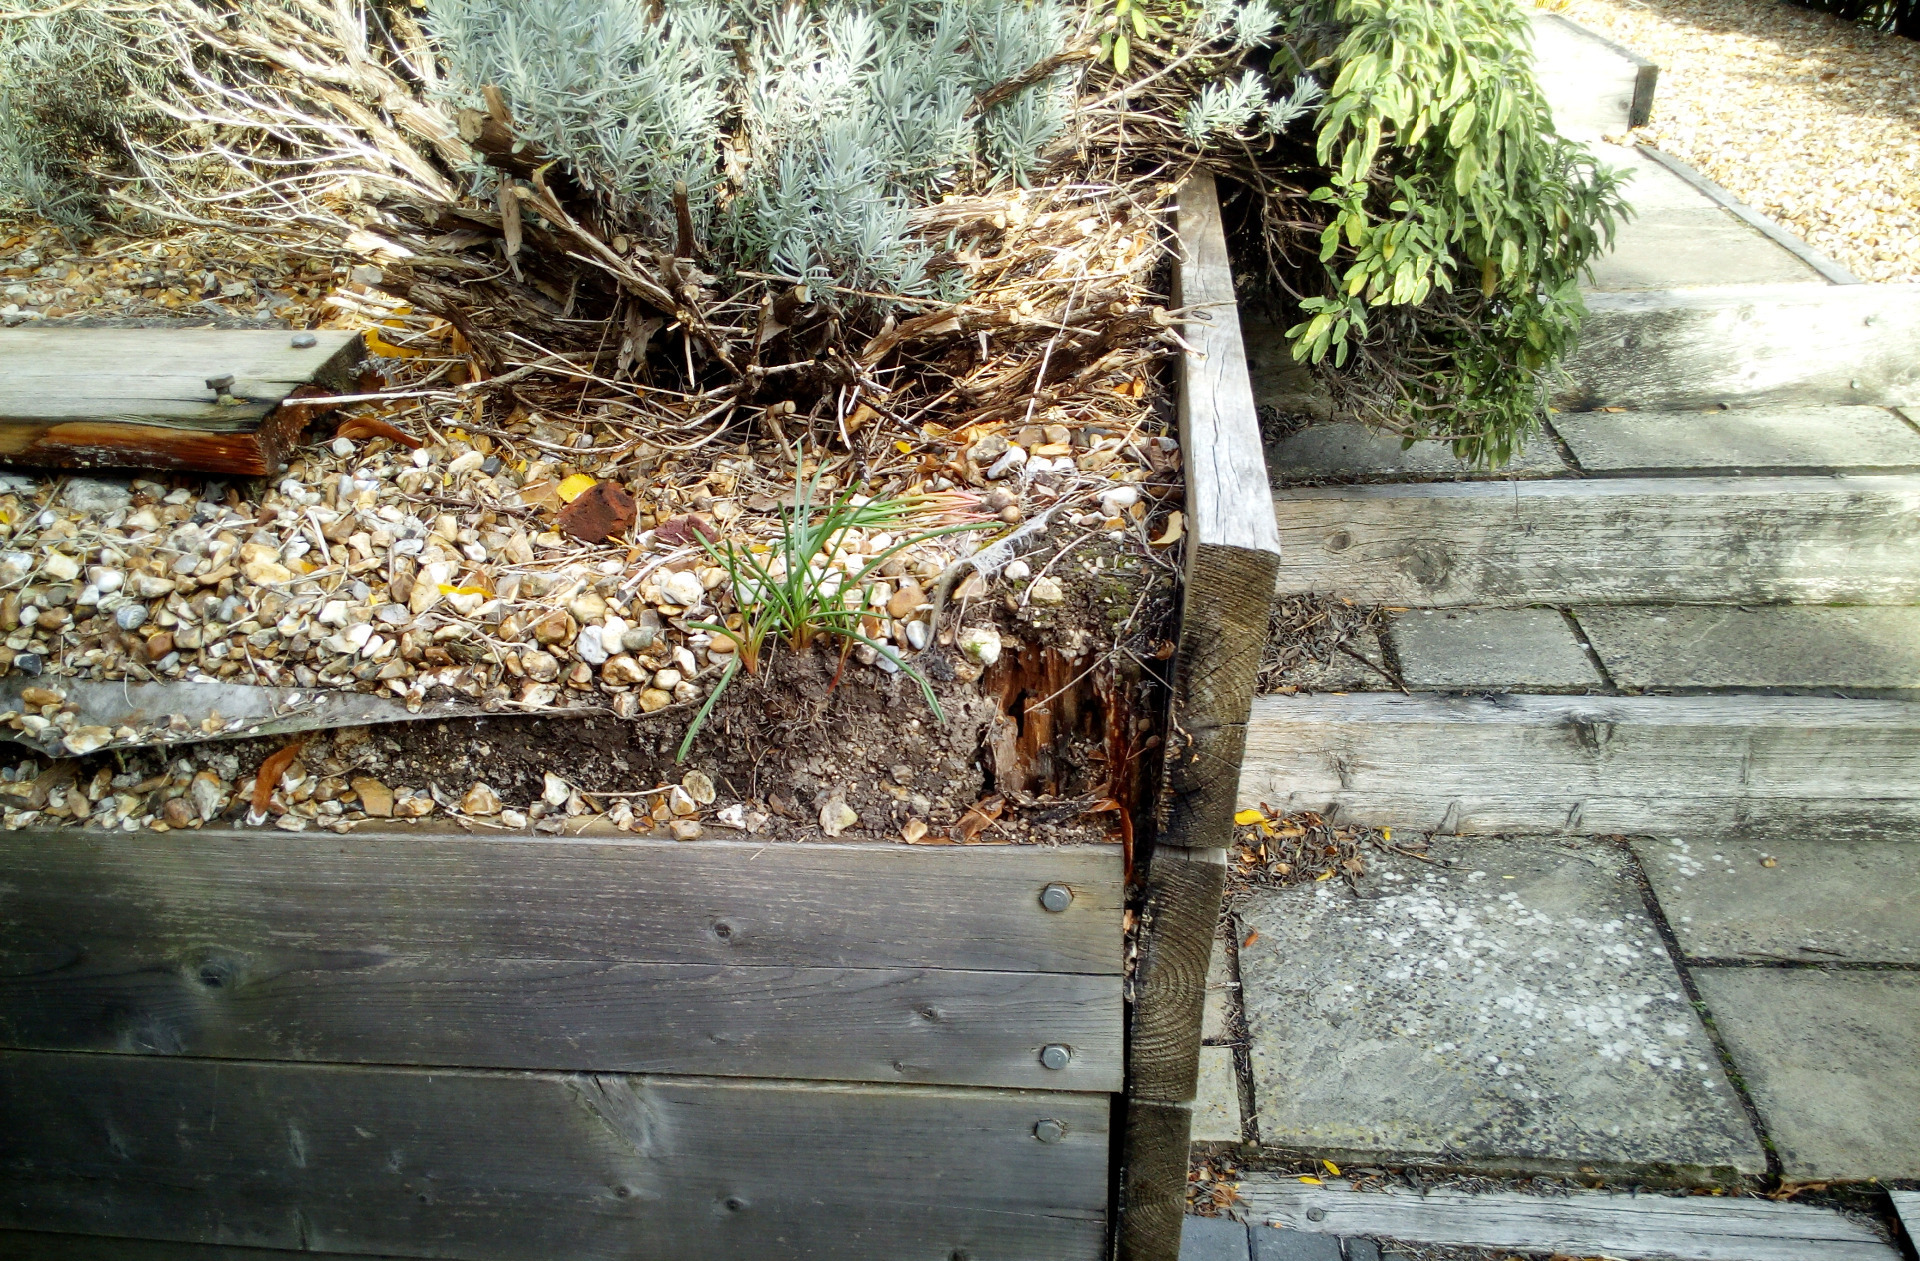 A steep sloping front garden in Winchester with paved steps, retaining wall and gabions